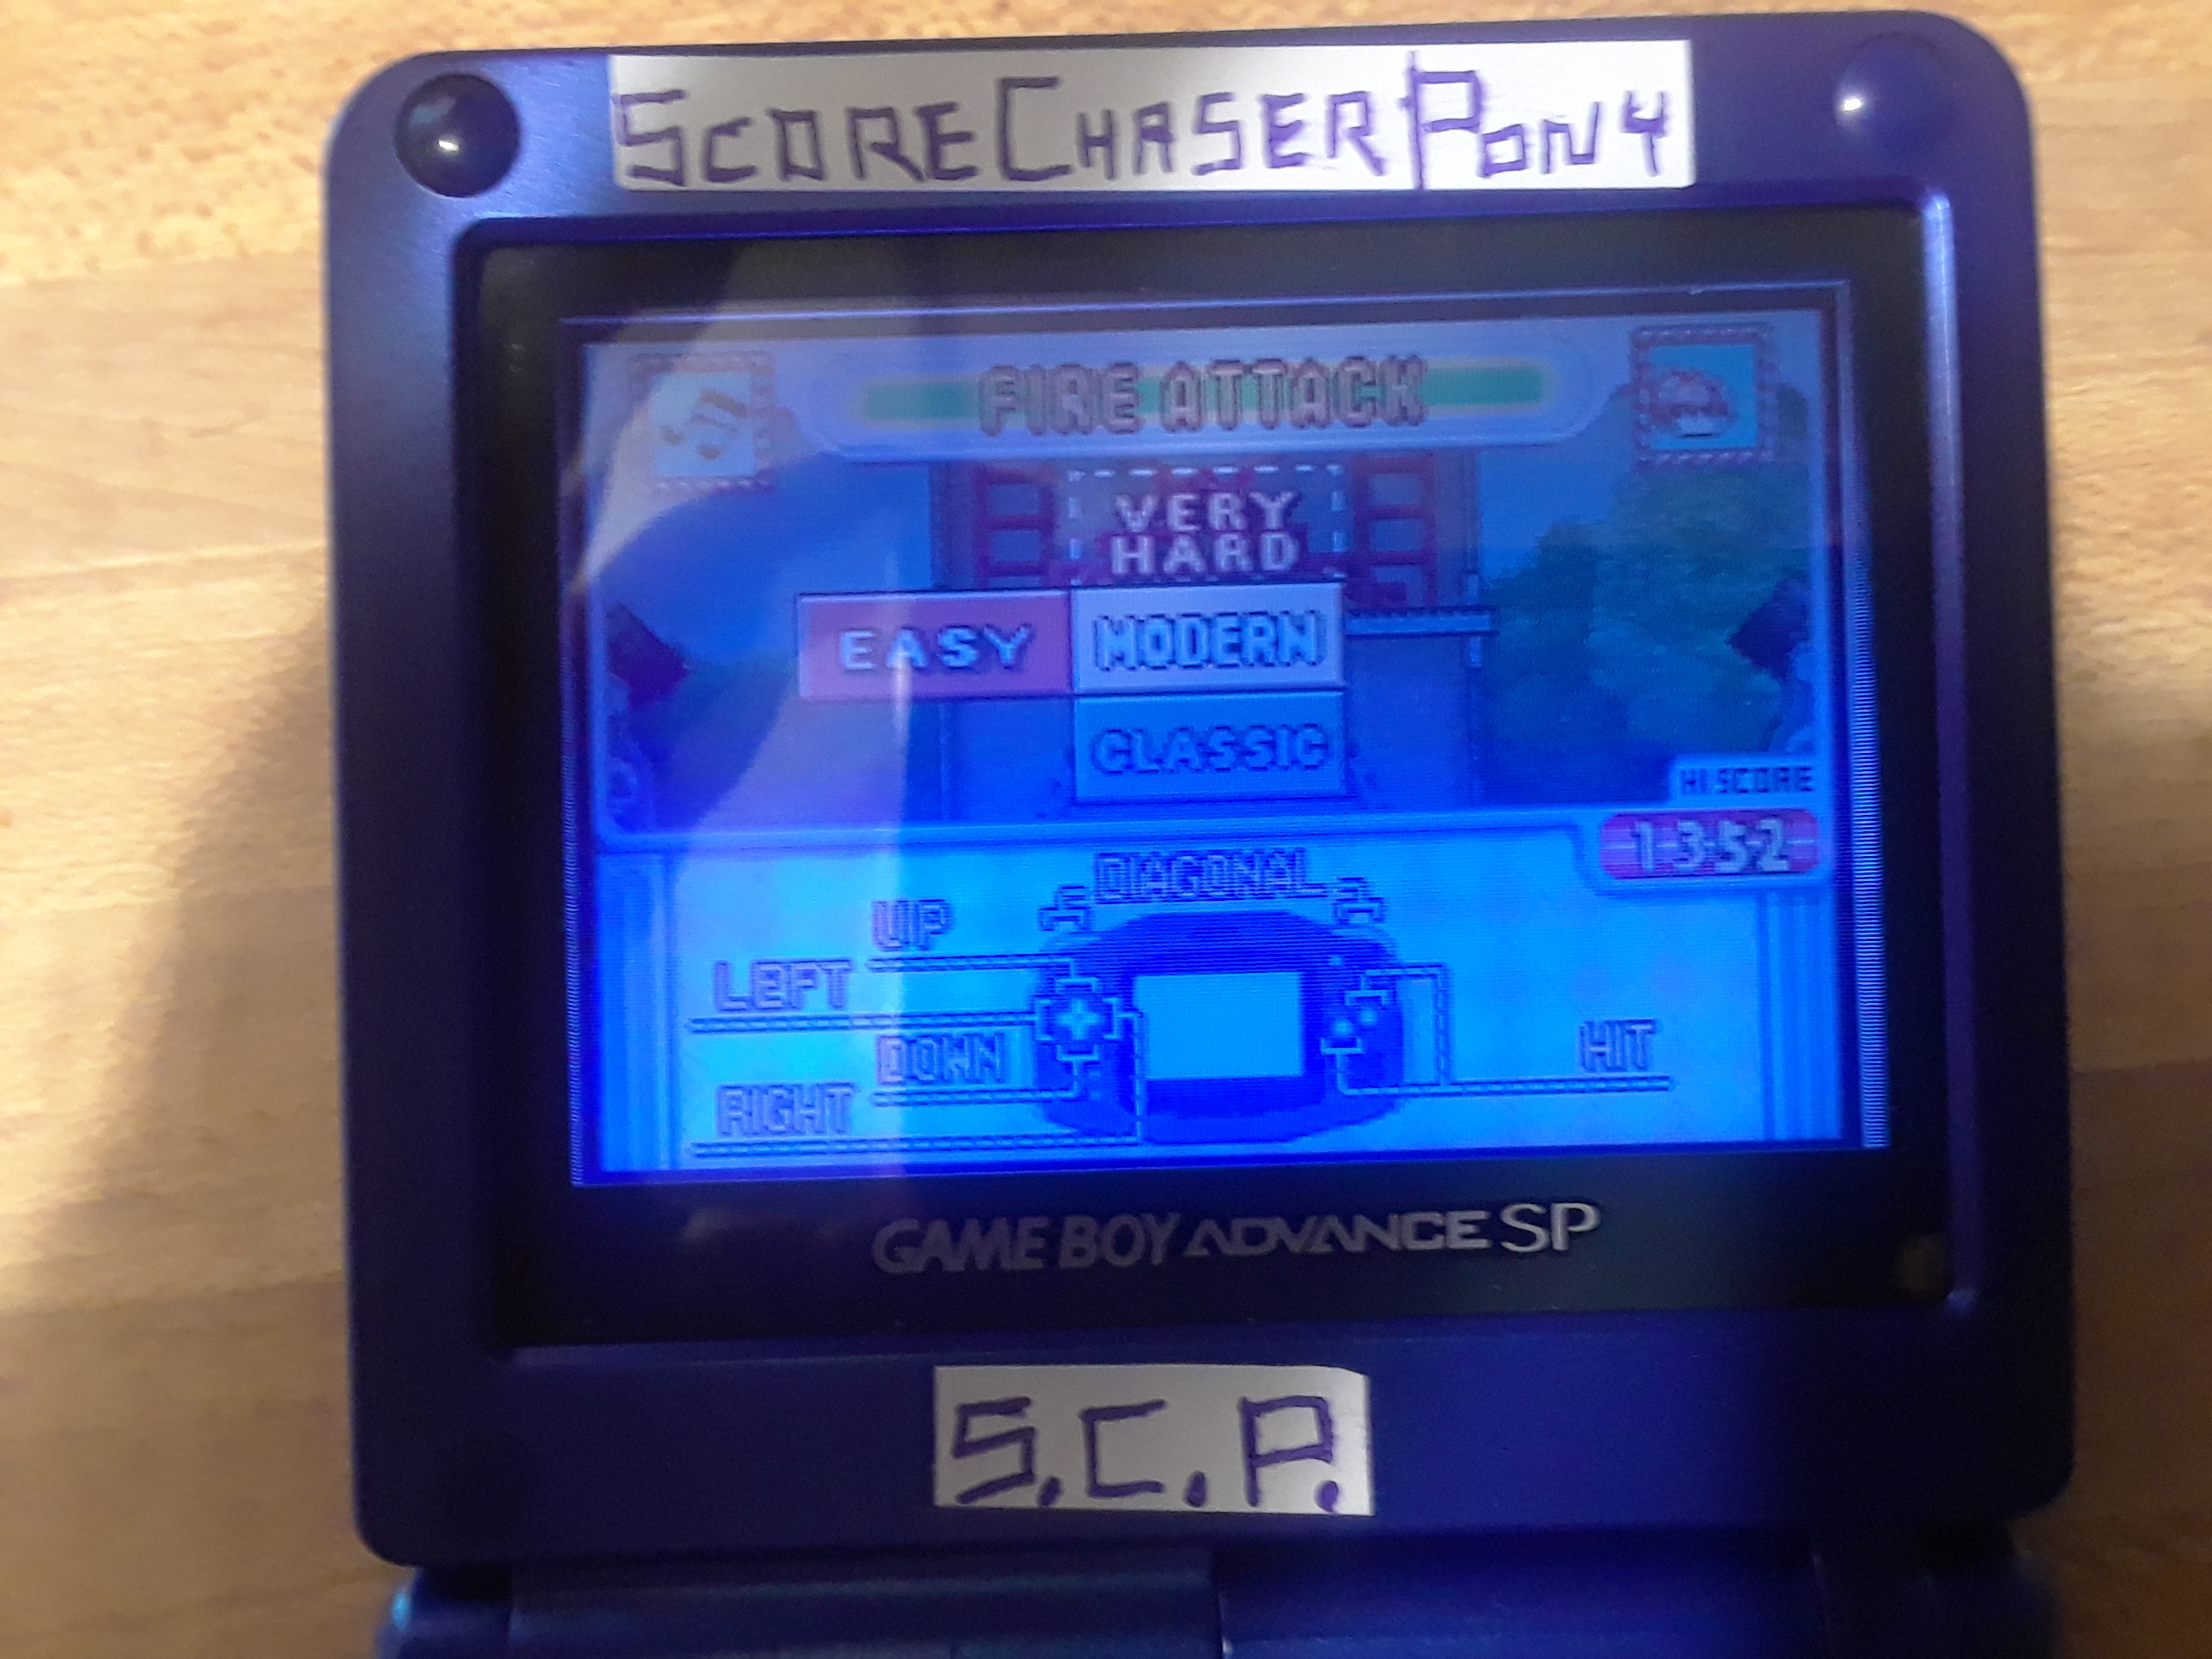 Scorechaserpony: Game & Watch Gallery 4: Fire Attack [Modern: Easy] (GBA) 1,352 points on 2019-07-24 11:59:42